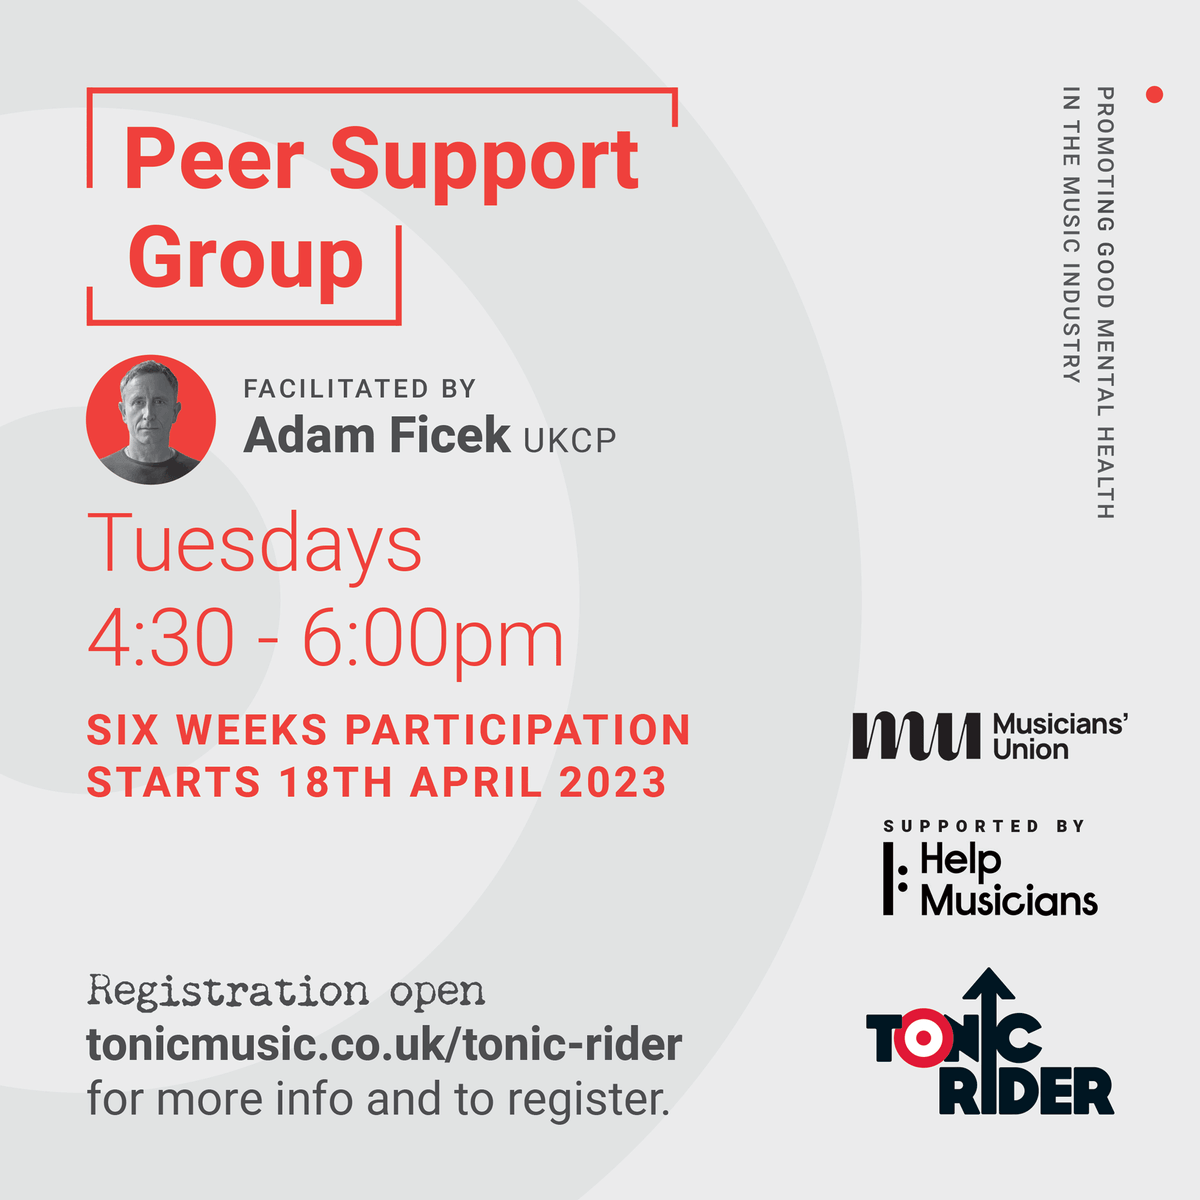 We are delighted to announce our 2nd online Peer Support Group for music teachers with @WeAreTheMU & @HelpMusicians 

facilitated by @adamficek 

Register your interest > forms.gle/cQHwf2A7D4cqnm…

#TonicRider #MusicMindsMatter #WeAreTheMU #Teaching #MentalHealth #Wellbeing #Music